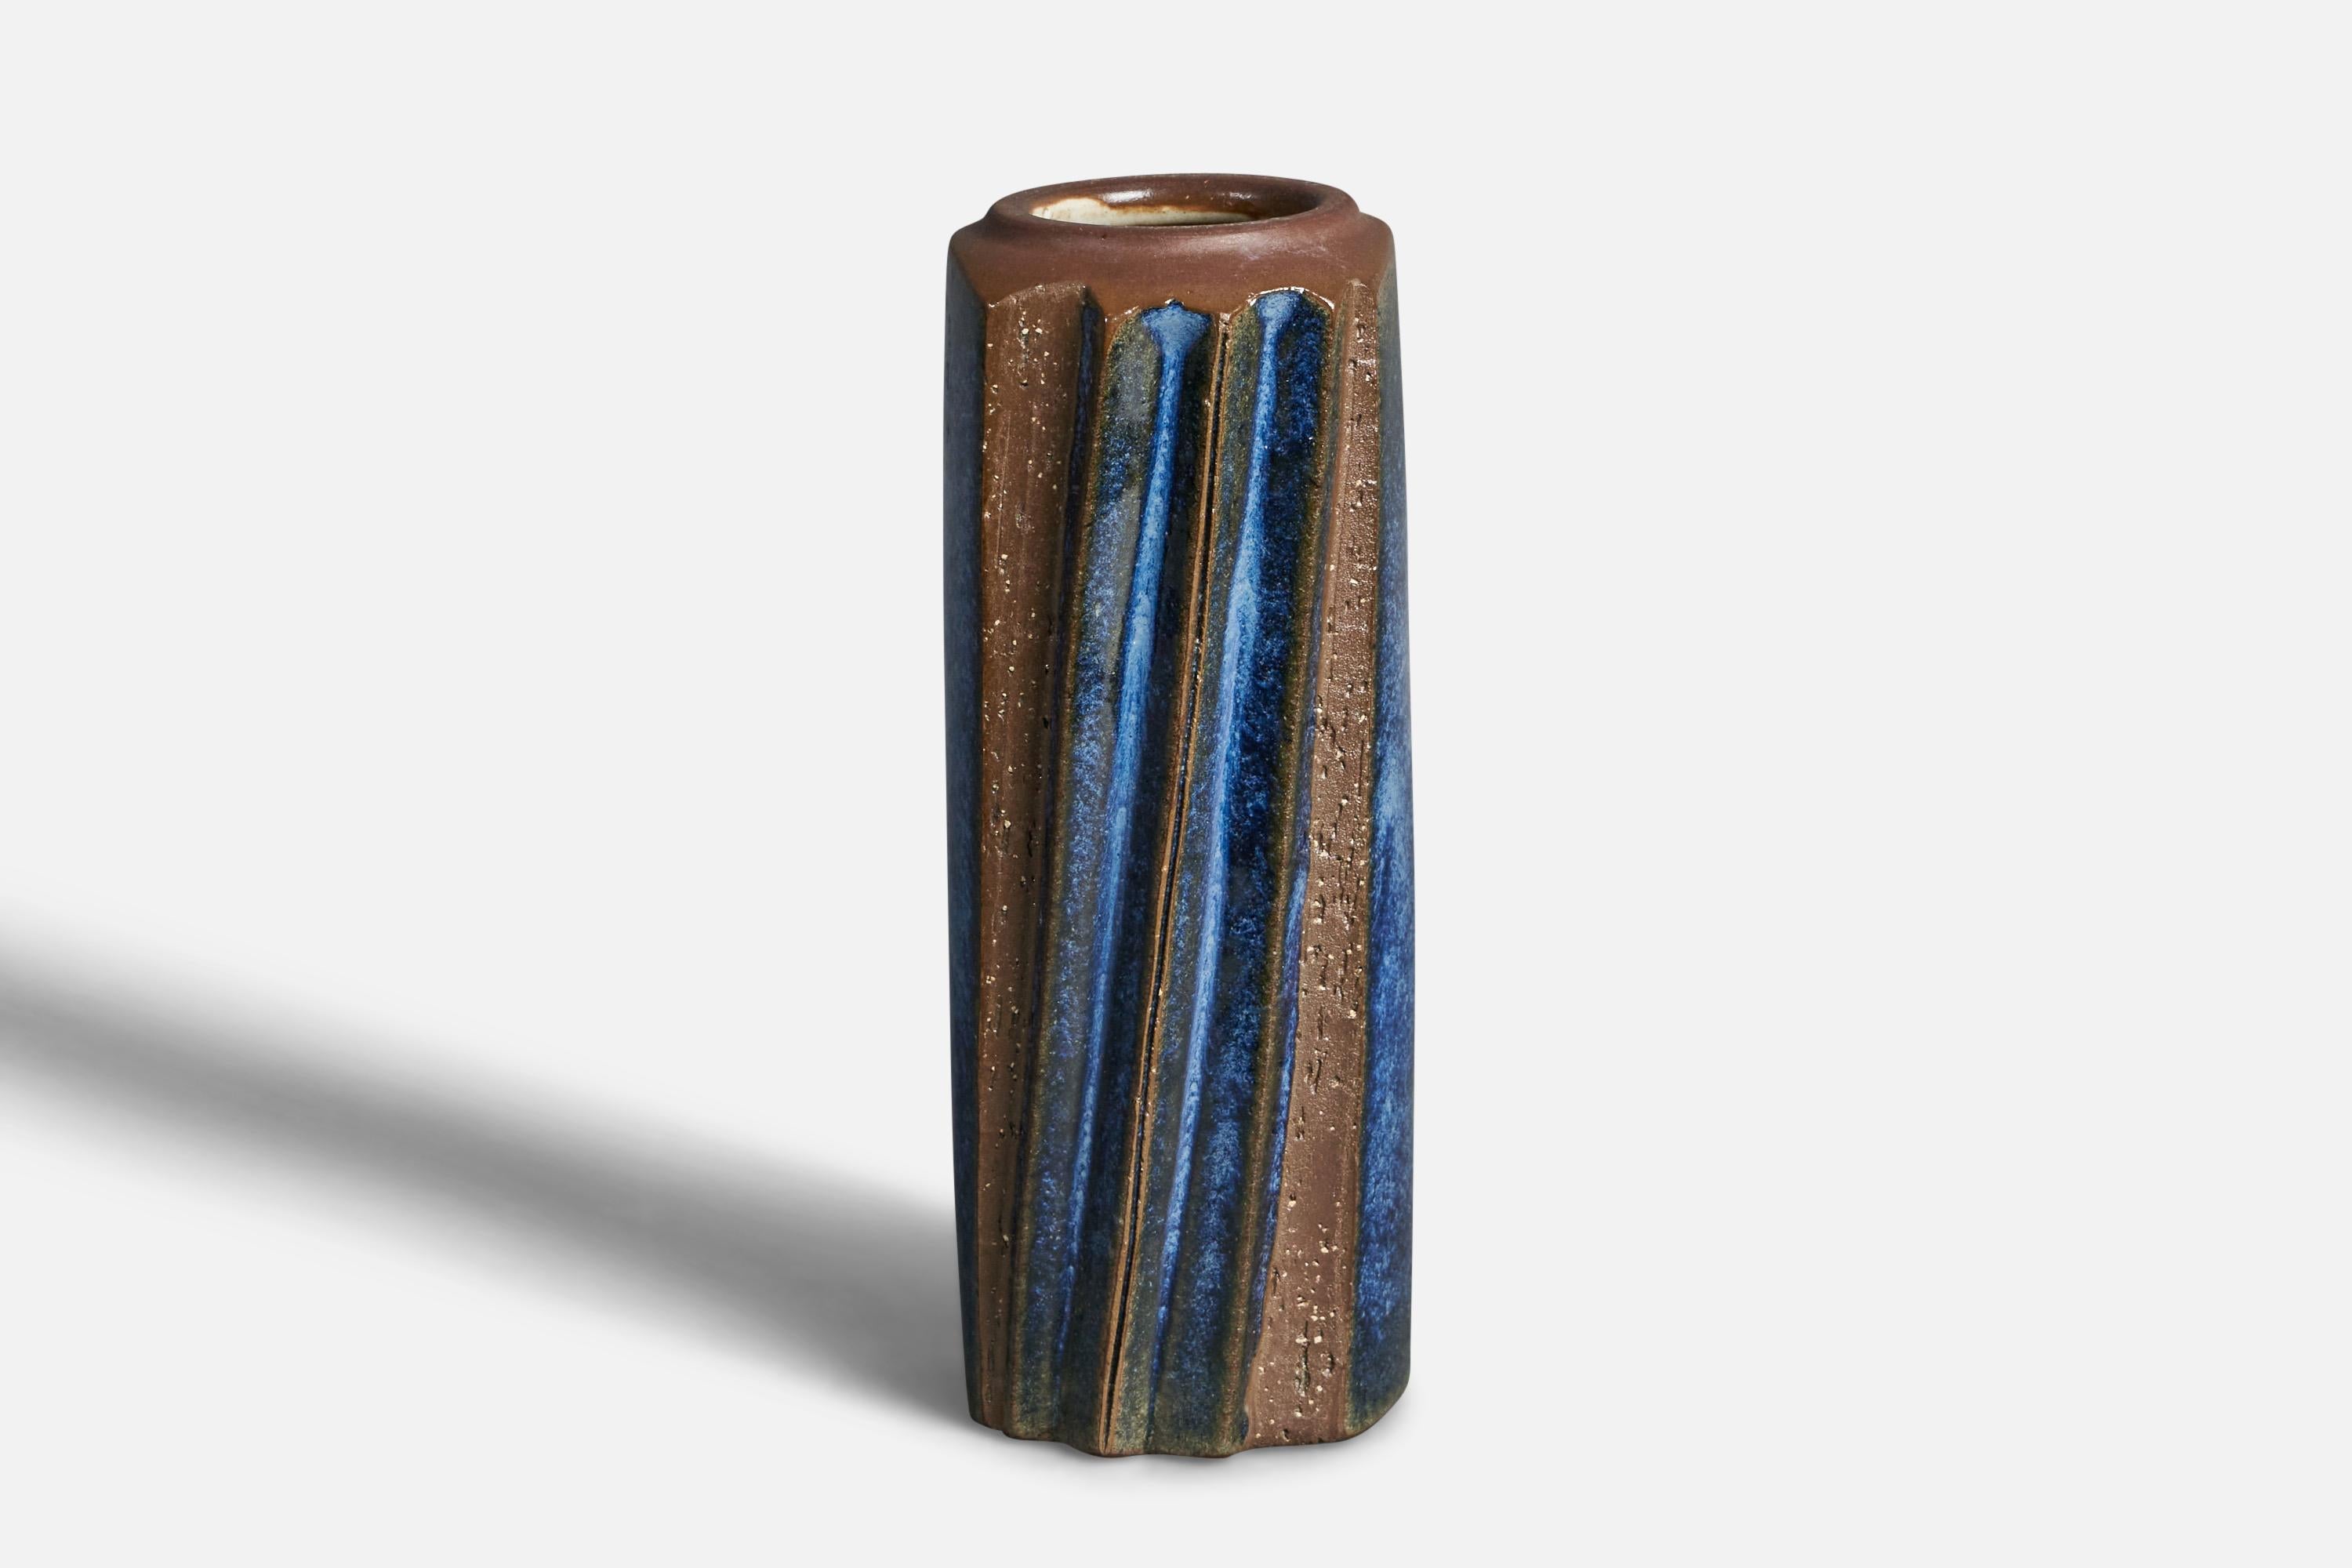 A blue and brown semi-glazed vase designed by Marianne Starck and produced by Michael Andersen, Bornholm, Denmark, 1960s.